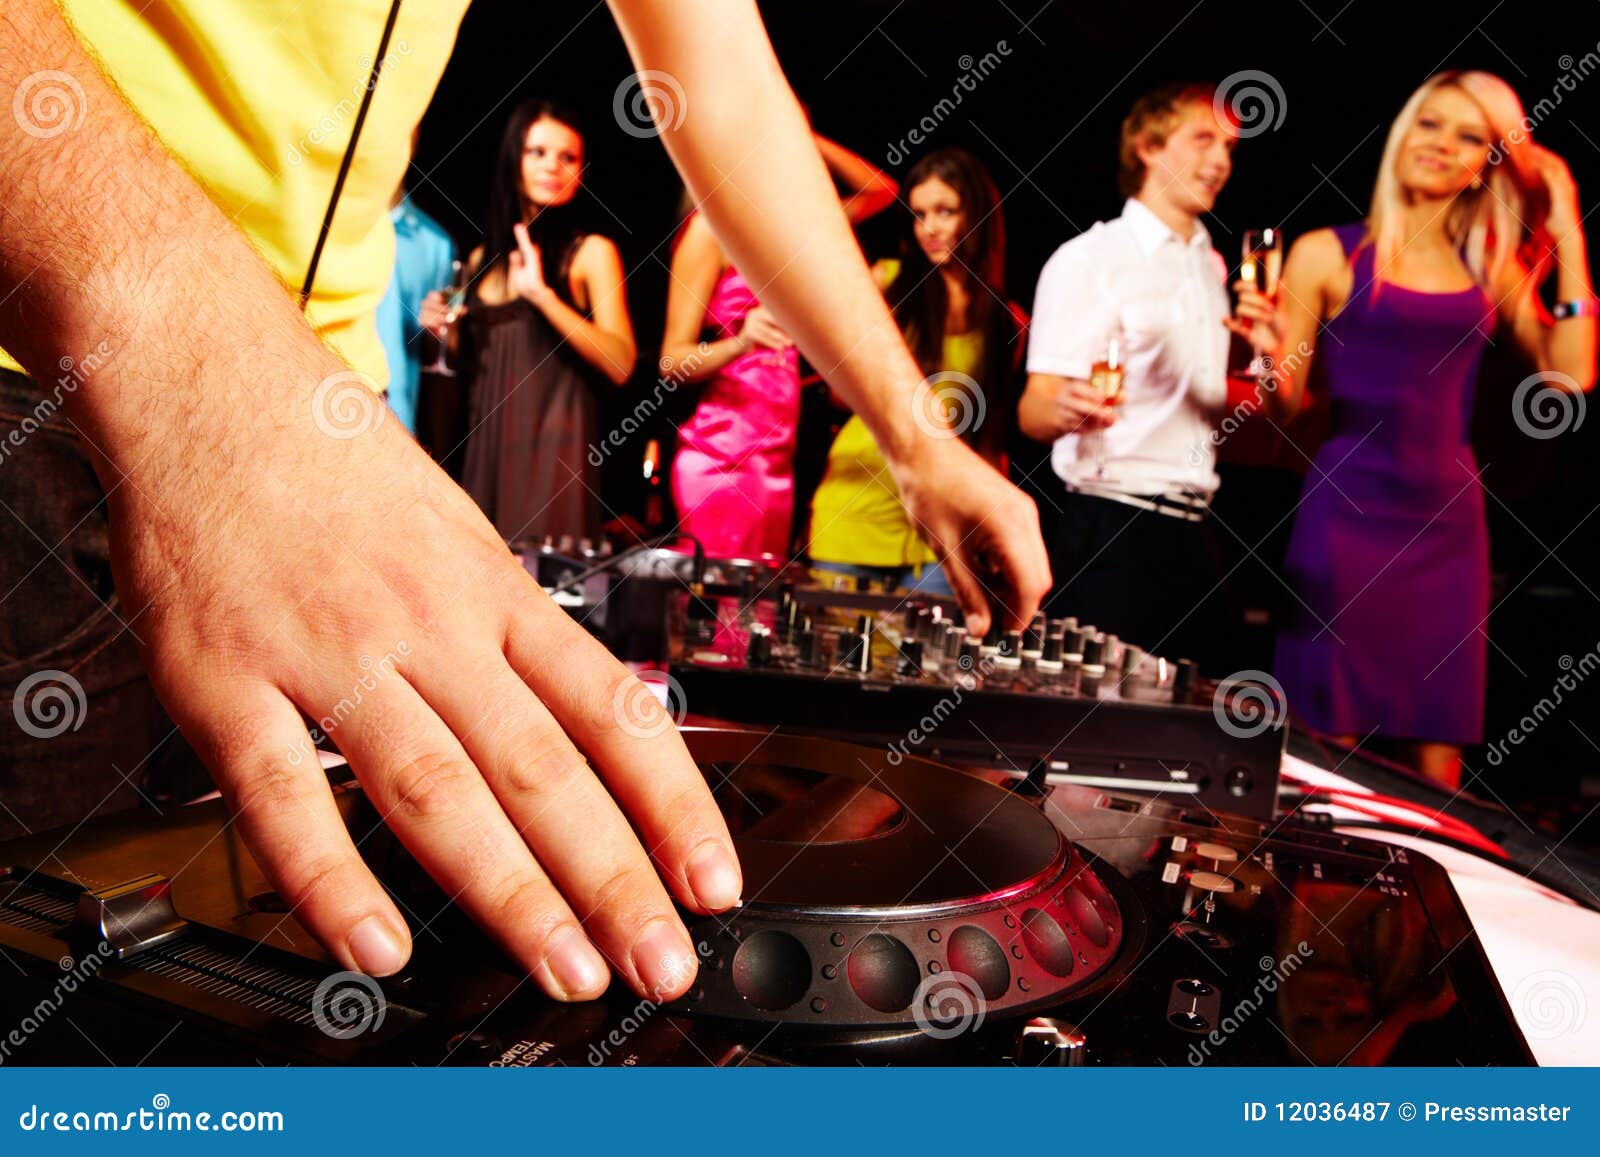 Spinning disc stock image. Image of electronics, hand - 12036487